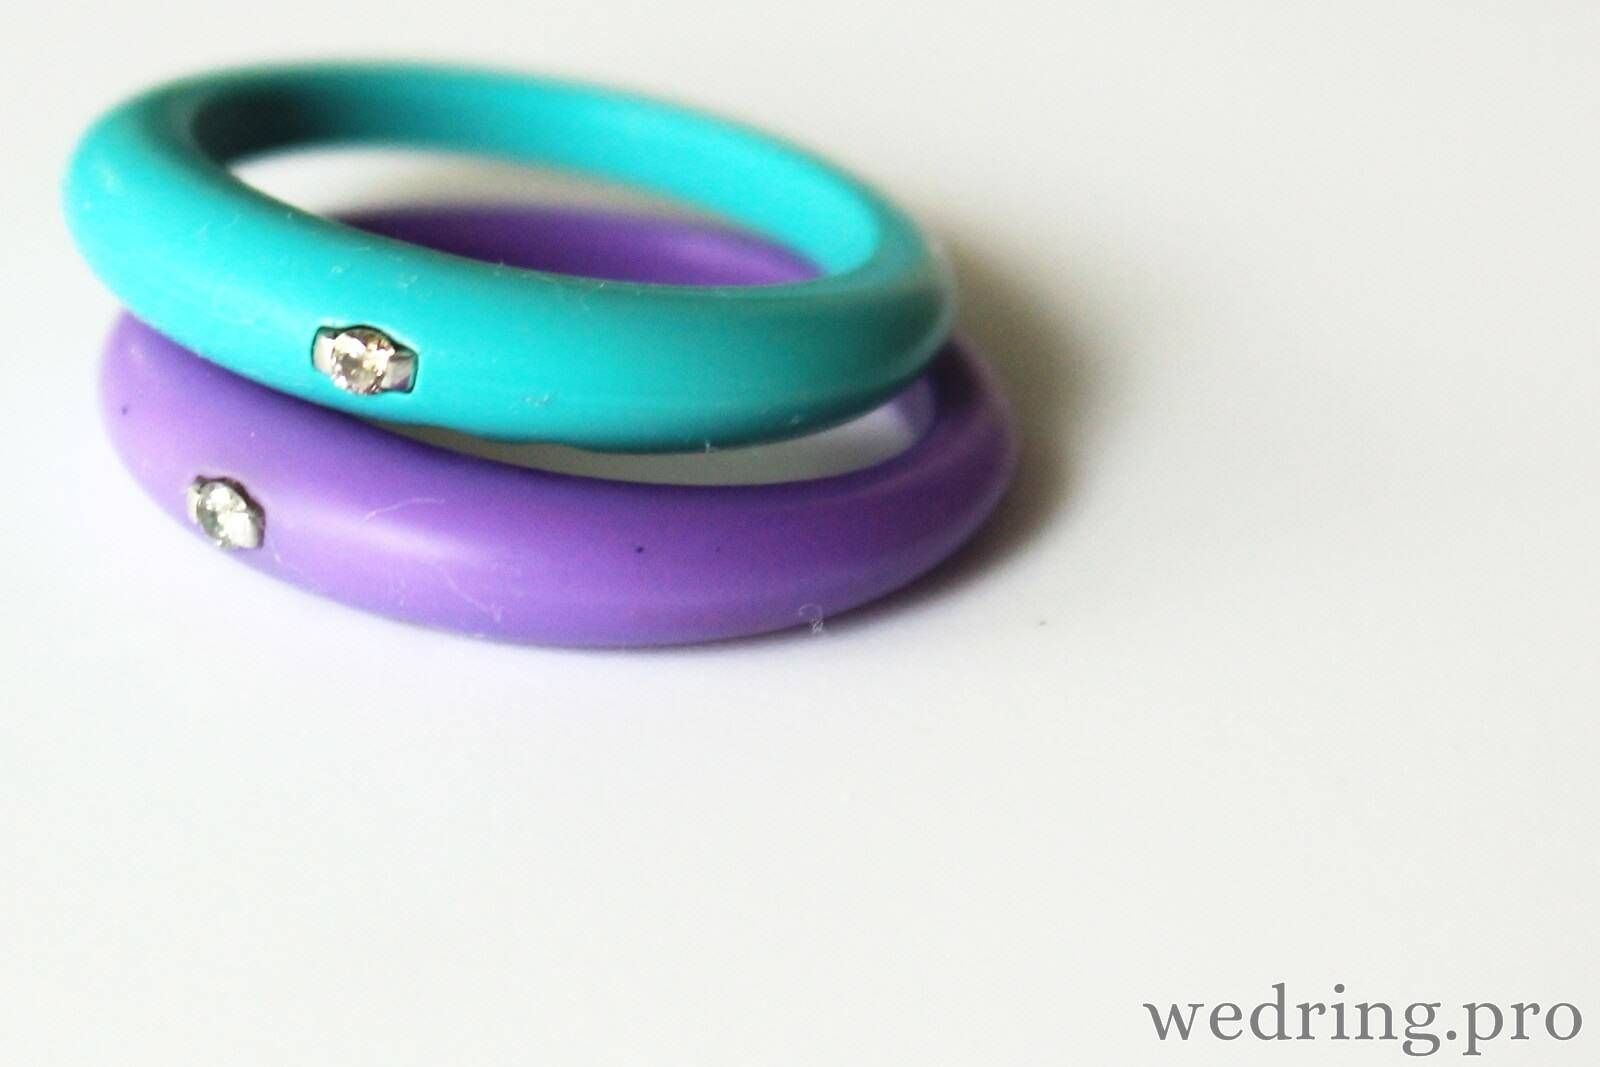 Plastic Wedding Rings As Party Favors Intended For Plastic Wedding Bands (View 14 of 15)